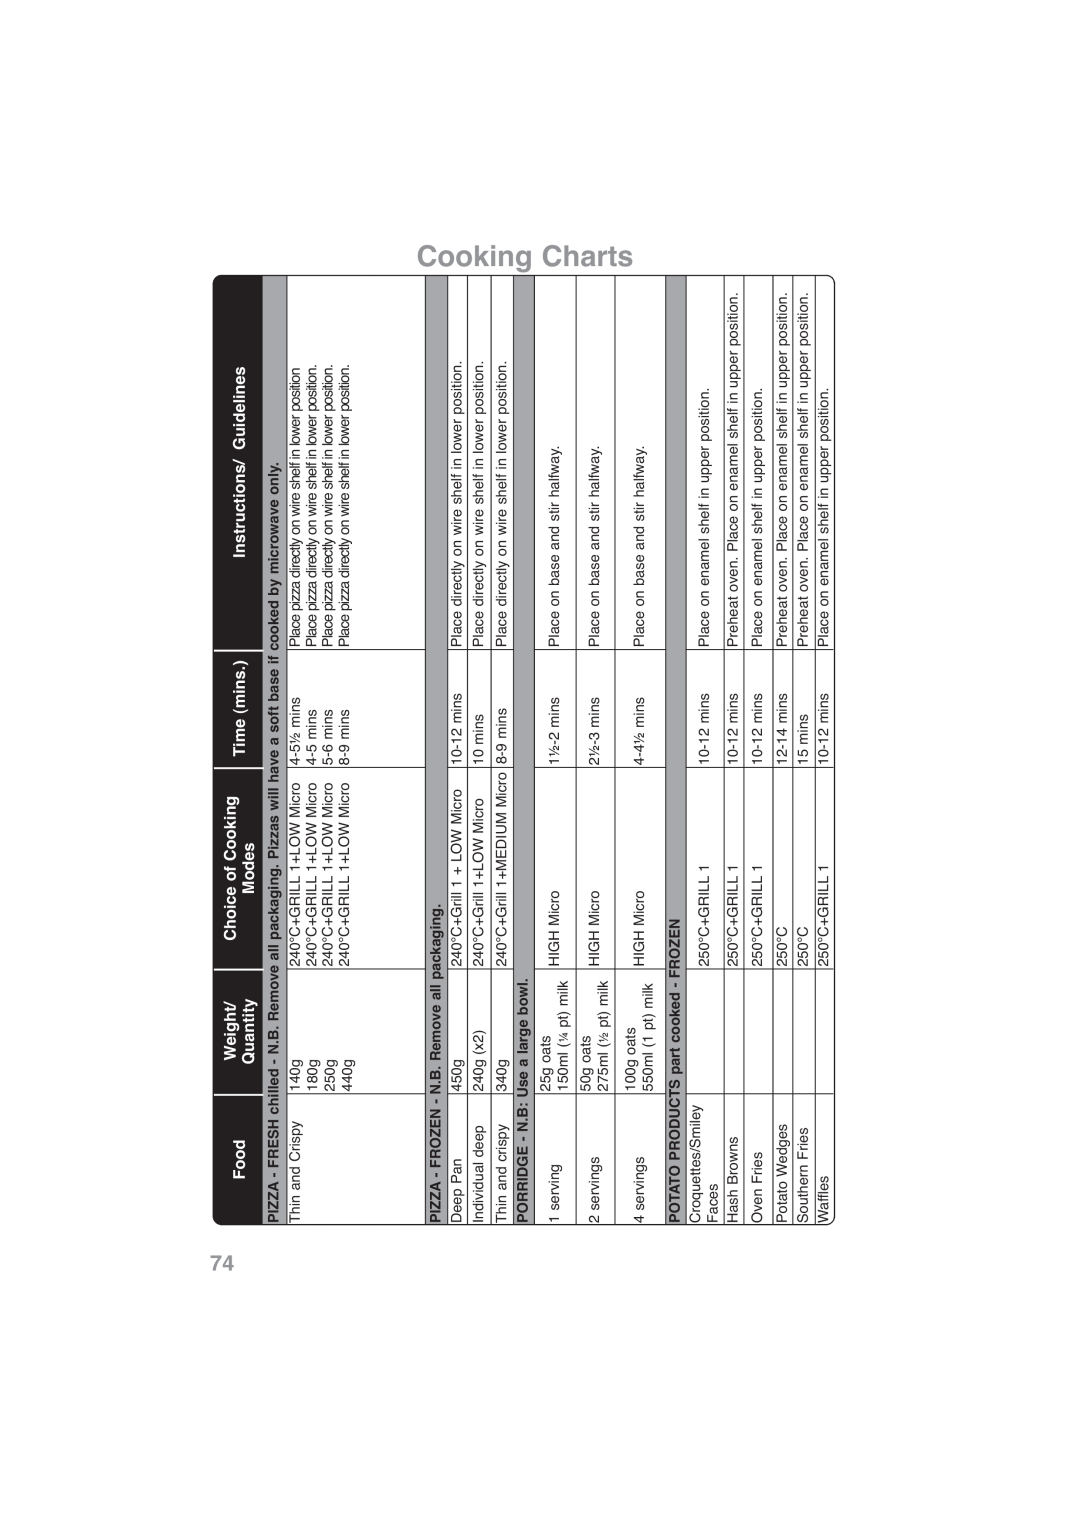 Panasonic NN-CF768M Cooking Charts, Weight, Choice of Cooking, Food, Quantity, Modes, Time mins, Instructions/ Guidelines 